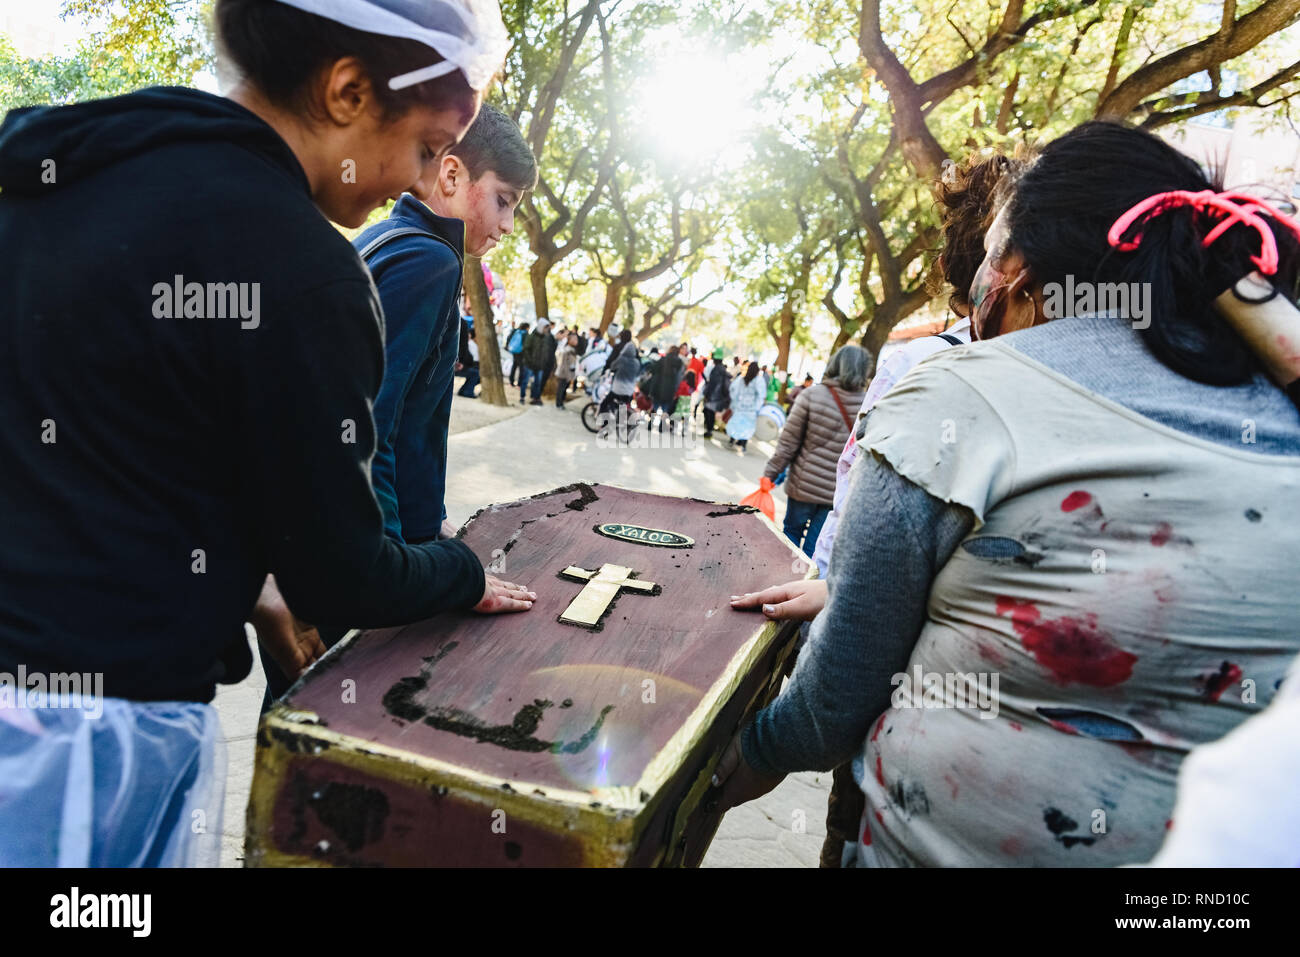 Valencia, Spain - February 16, 2019: False coffin transported by actors disguised in a street carnival. Stock Photo